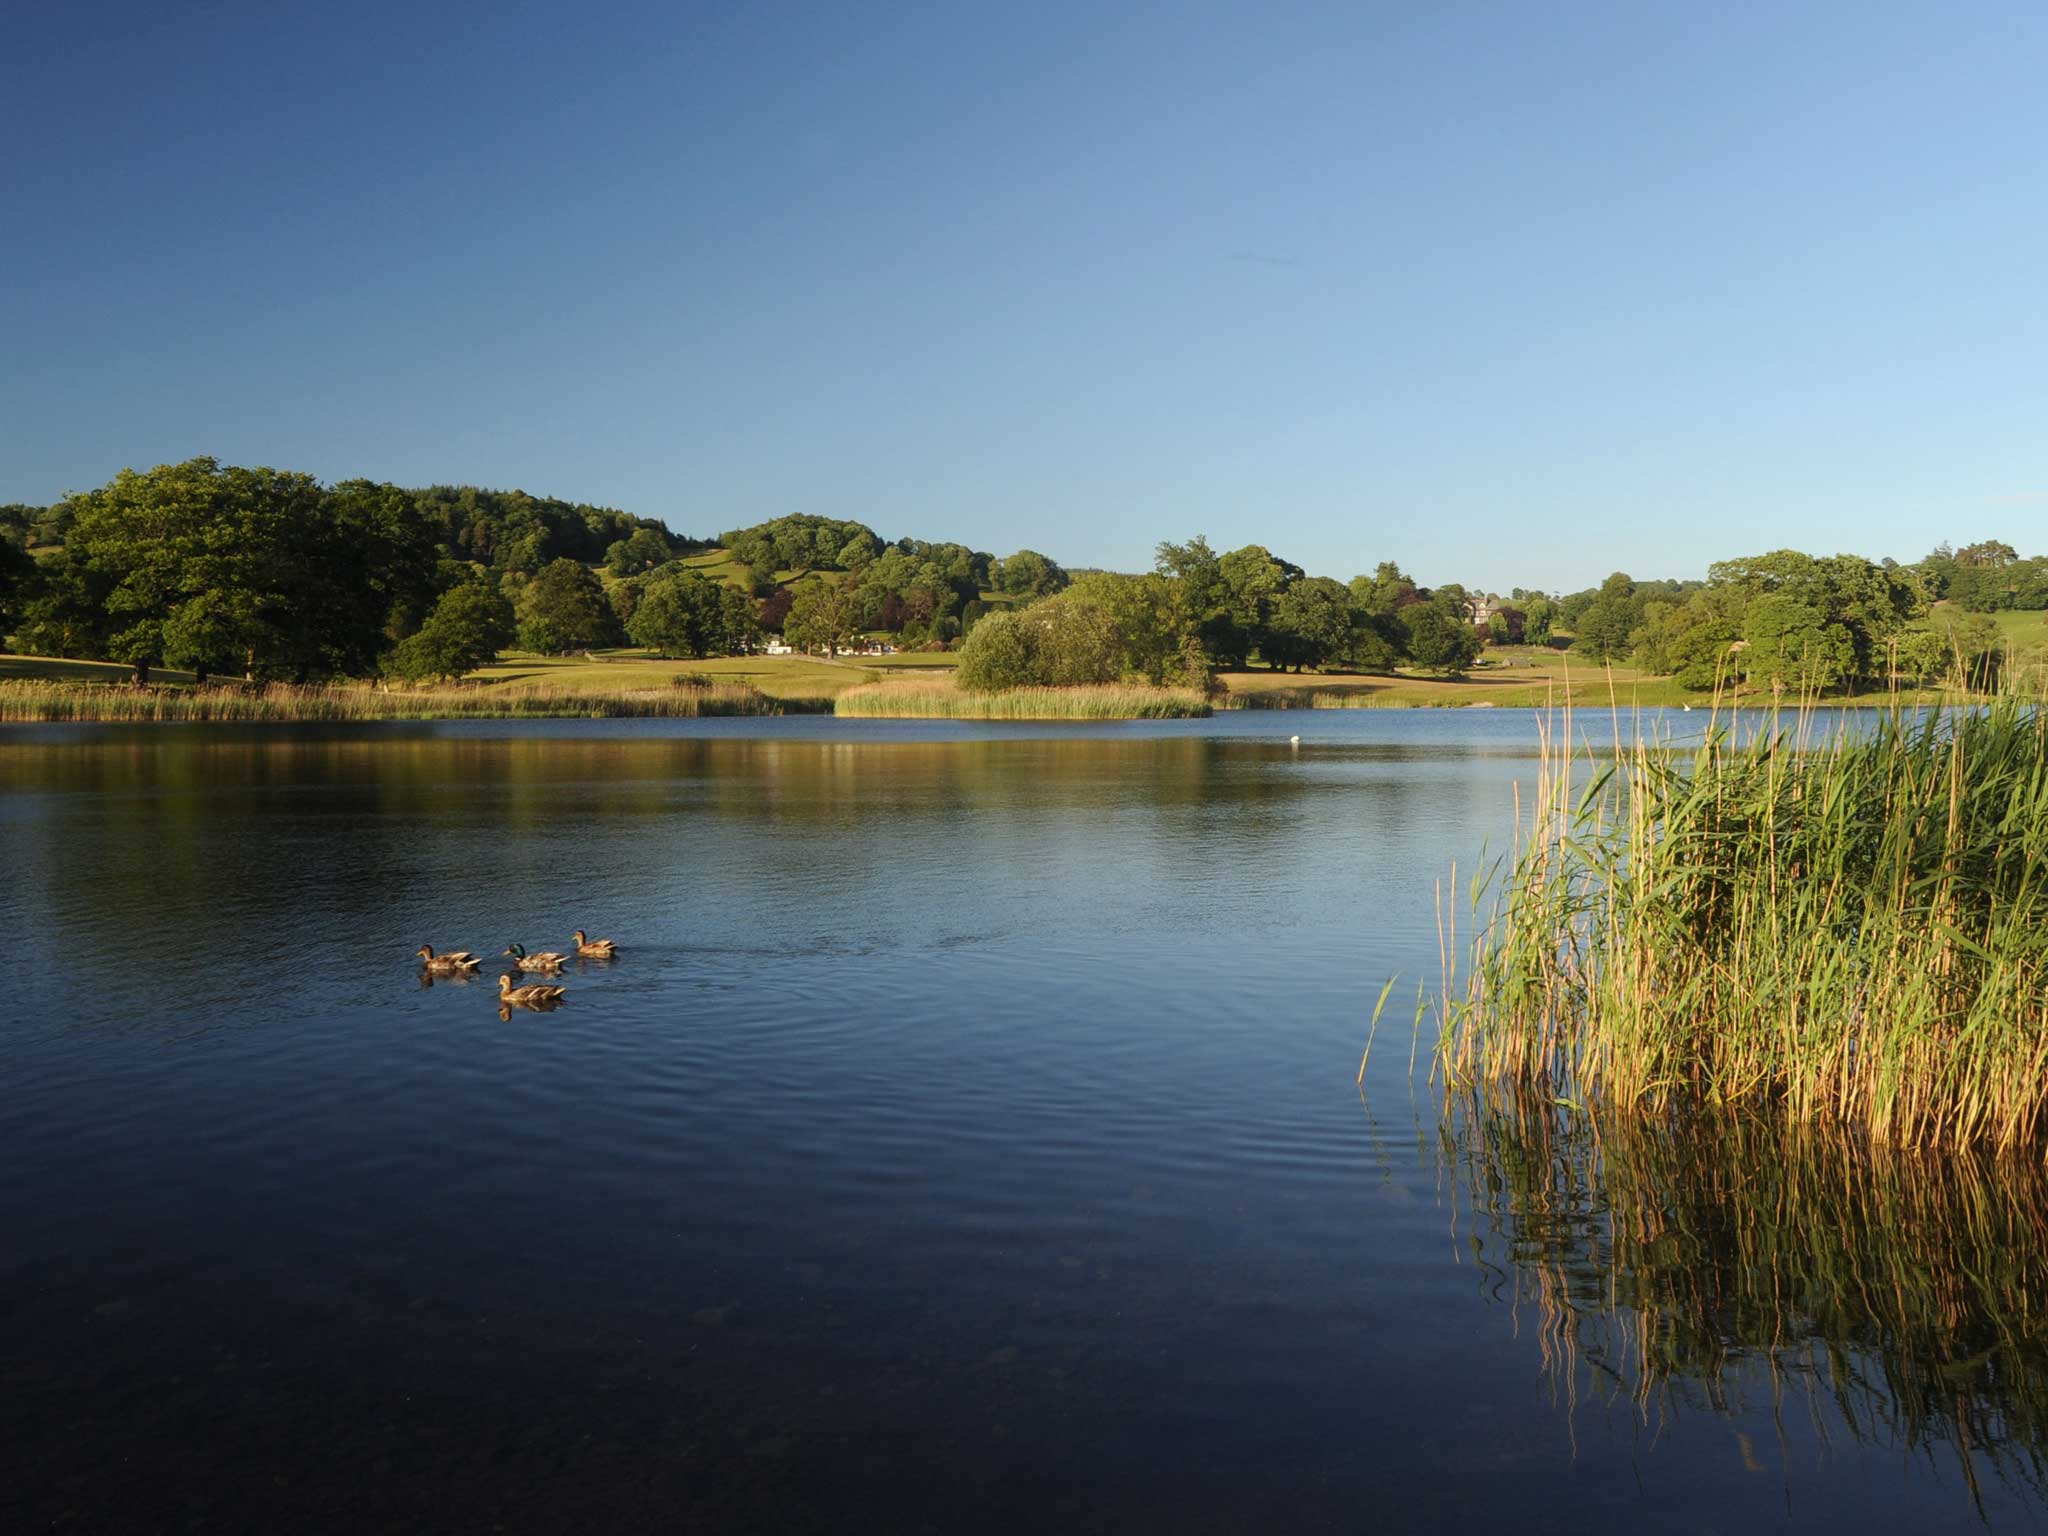 Esthwaite Water is up for sale on Ebay